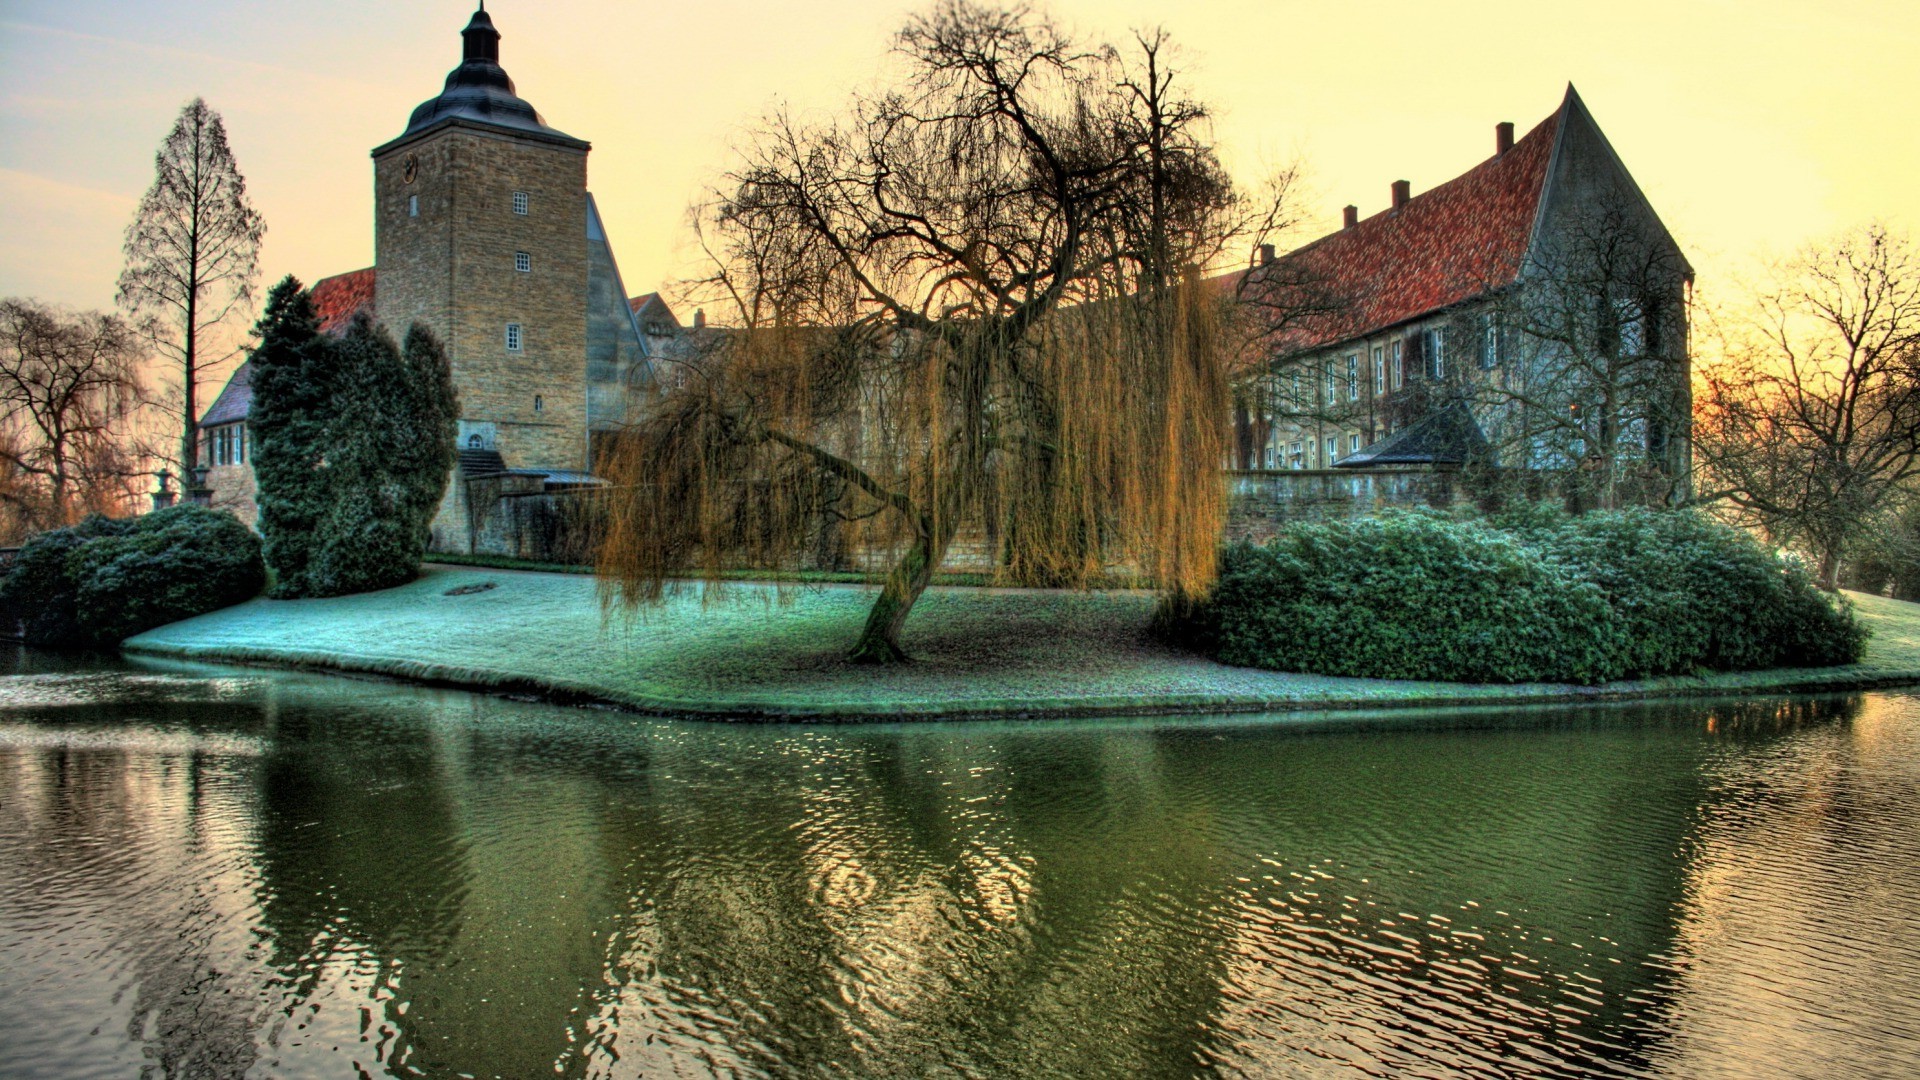 architecture, Landscape, Castle, Nature, Trees, Tower, HDR, Germany, Water, Grass, Reflection, Winter, Sunset Wallpaper